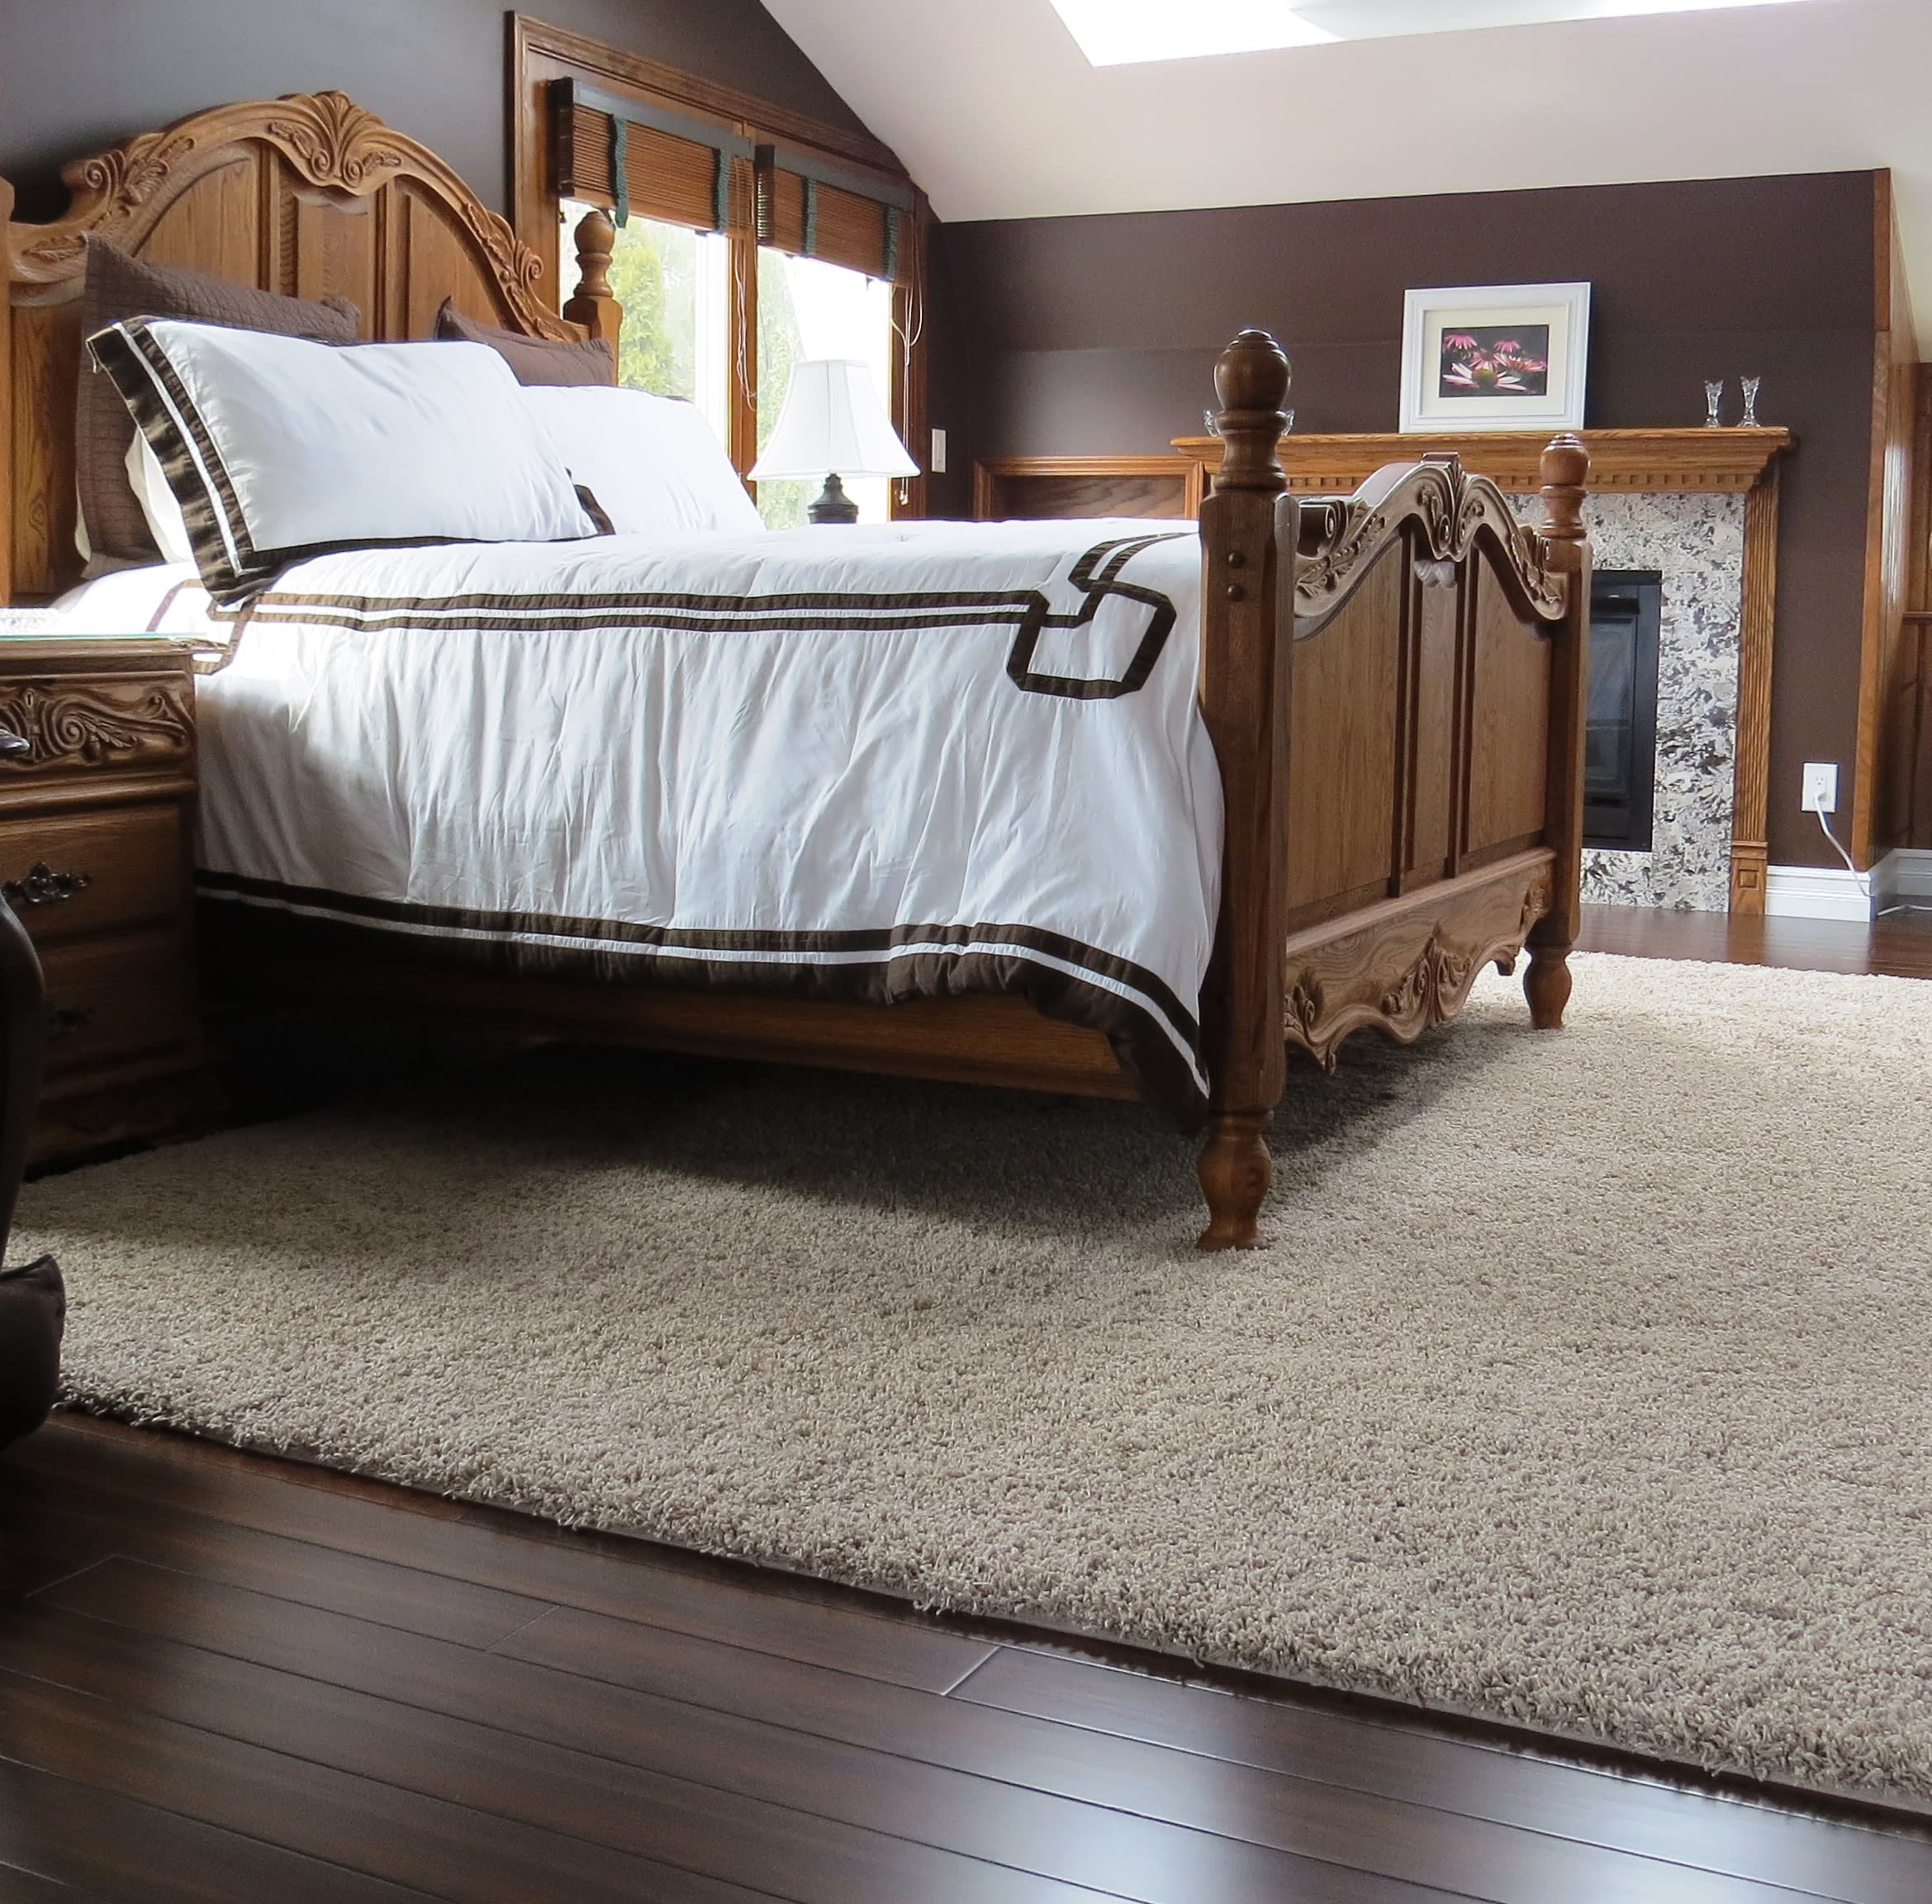 Residential bedroom hardwood flooring and a plush area rug from Independent Floor Covering located in Port Huron, MI